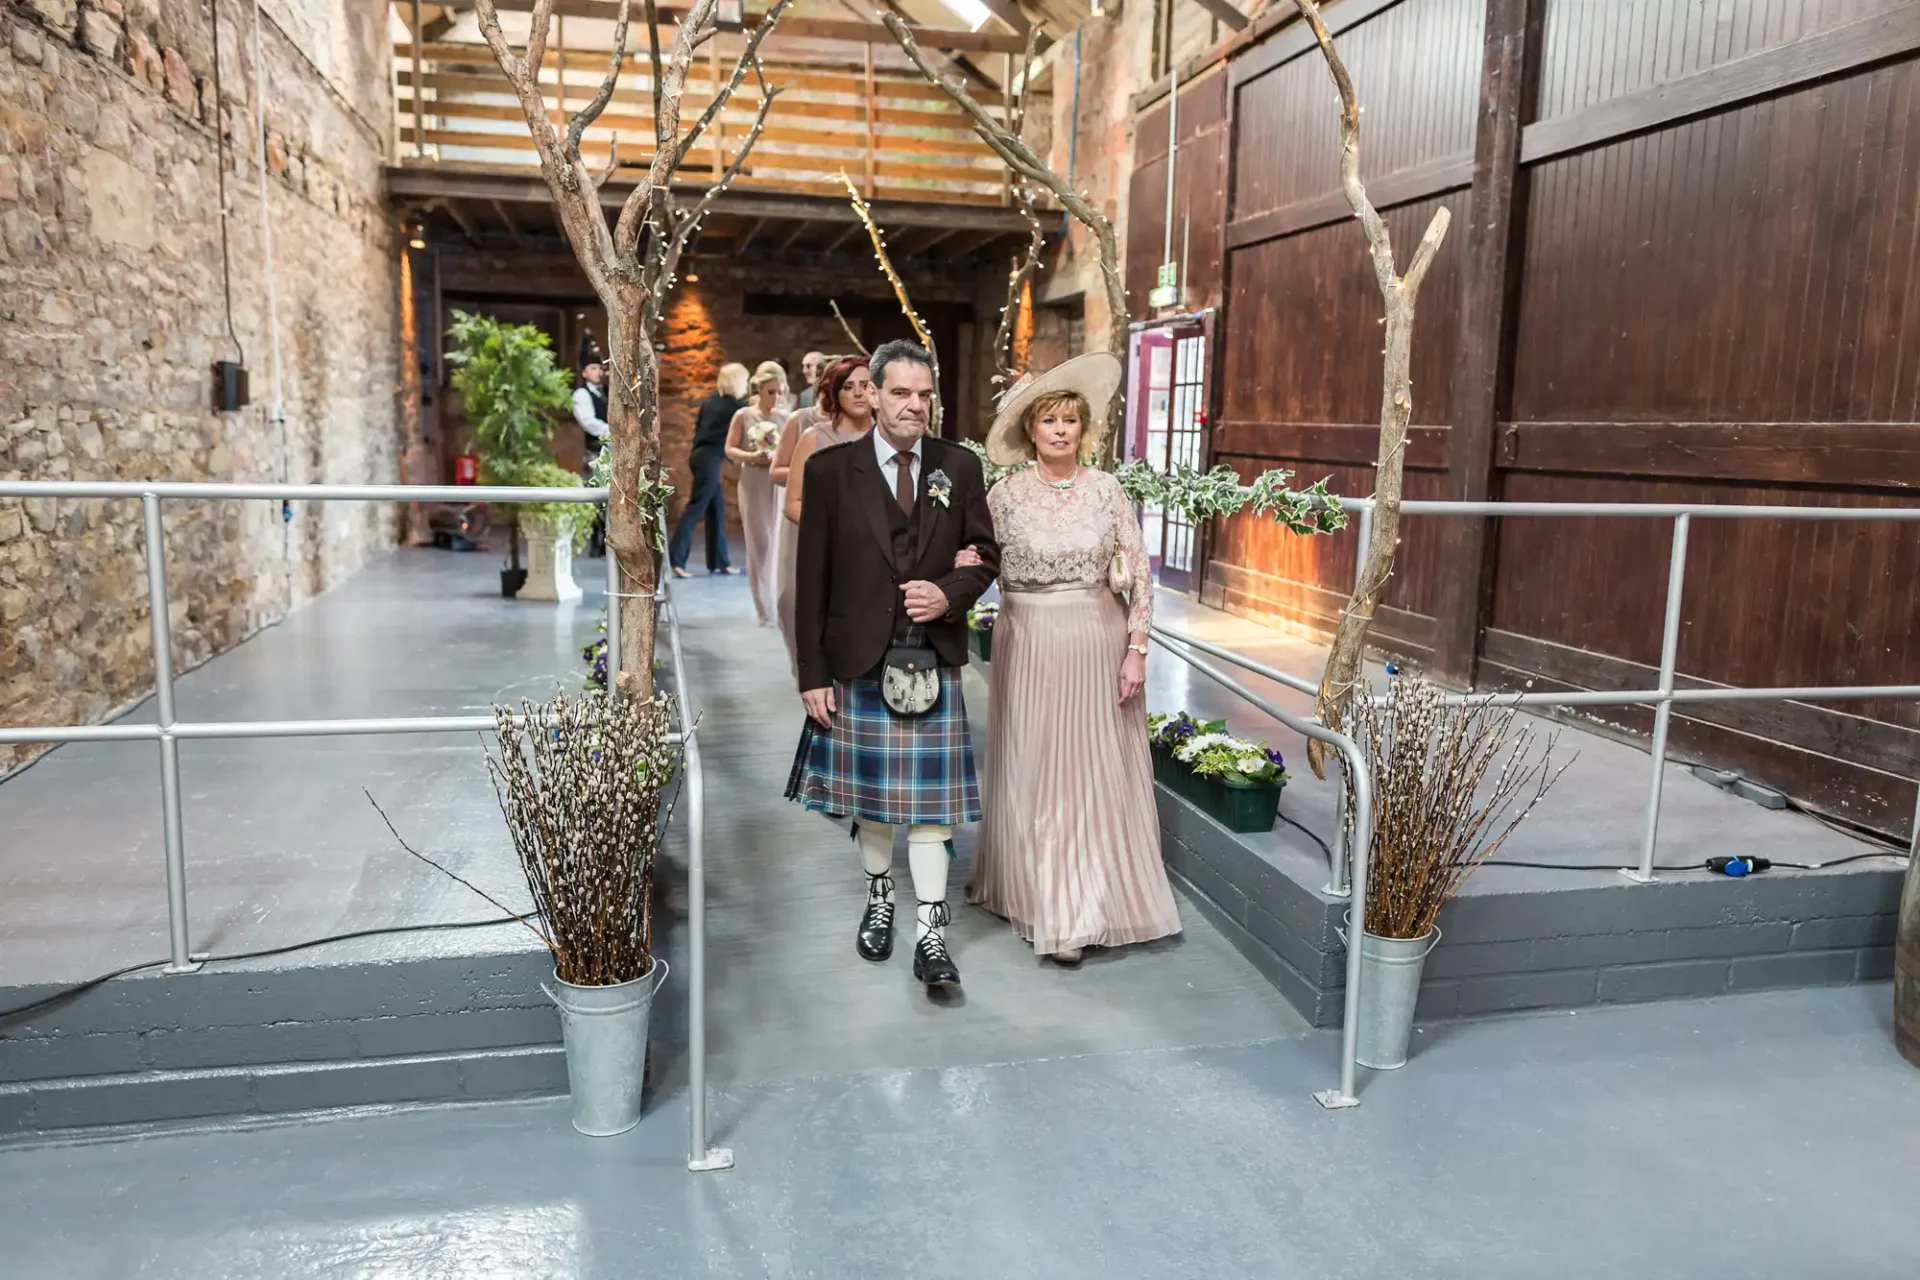 A couple dressed in traditional scottish attire walking down an aisle in a rustic indoor venue, flanked by decorative trees.